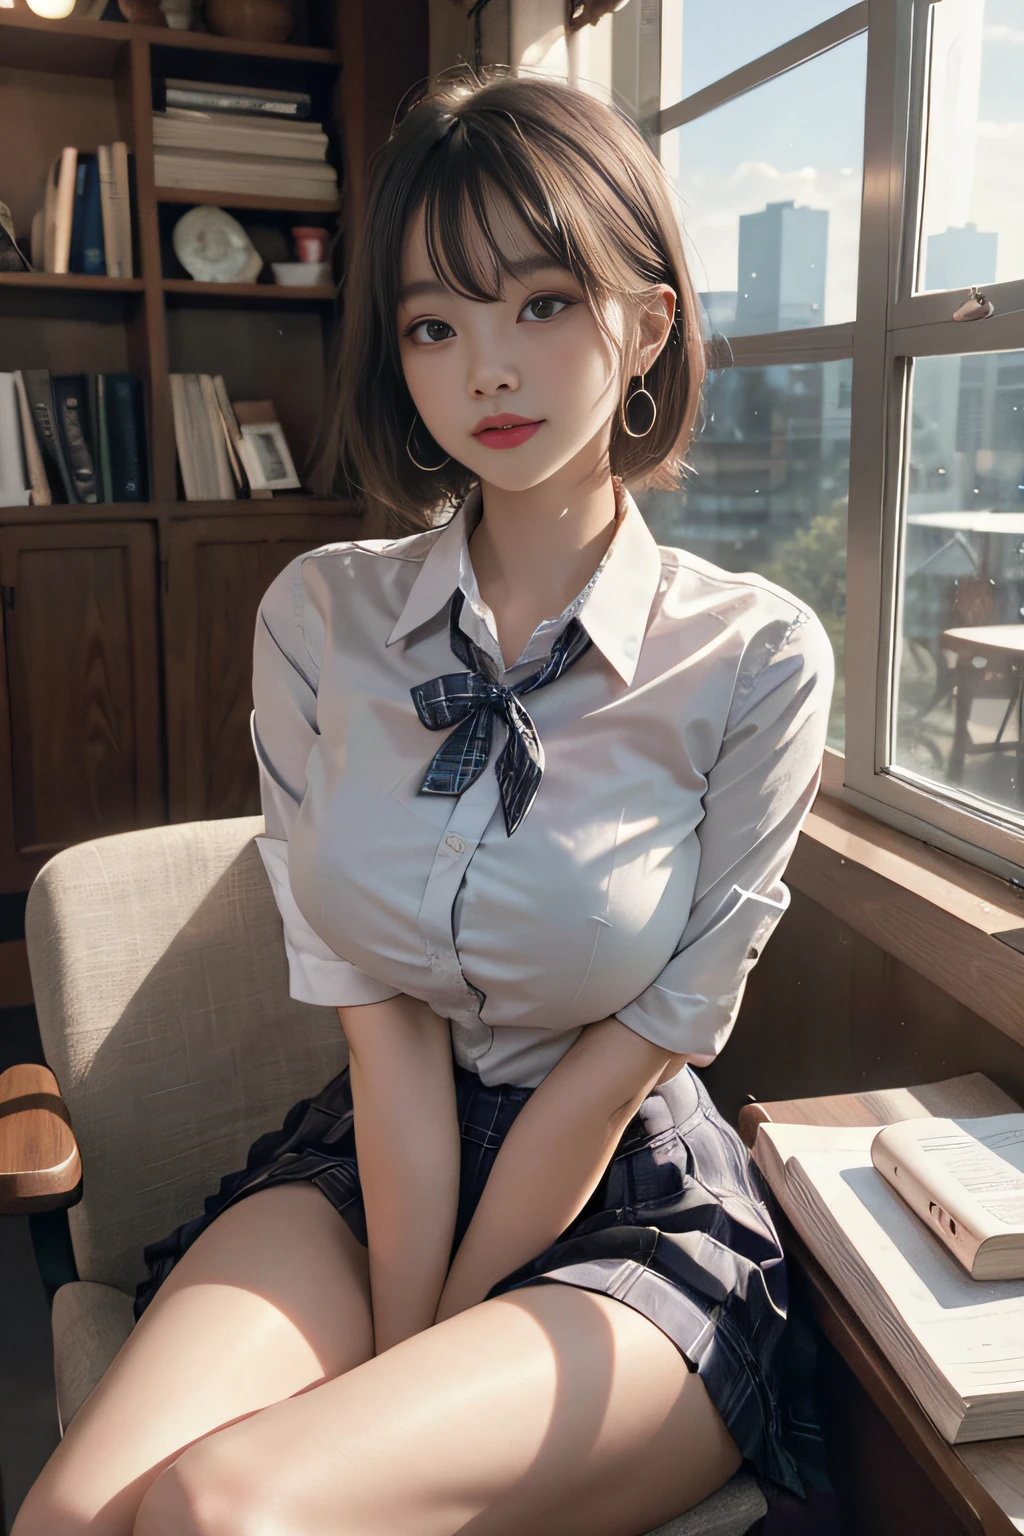 Best image quality, RAW photo, super high resolution, taken from the side, gentle smile, 16 years old Korean, very big breasts, tie, ribbon, school uniform, collared shirt,  shirt, plaid skirt, fair skin, shiny white skin, short bob, bright silver hair, bright gray hair, neatly aligned bangs, beautiful eyes, beautiful eyes of random colors, very thin lips, beautiful eyes with details, Elongated eyes, pale pink cheeks, long eyelashes, beautiful double eyelids, eyeshadow, earrings, night school, dimly lit library at night, library desk, sitting at desk and crossing legs